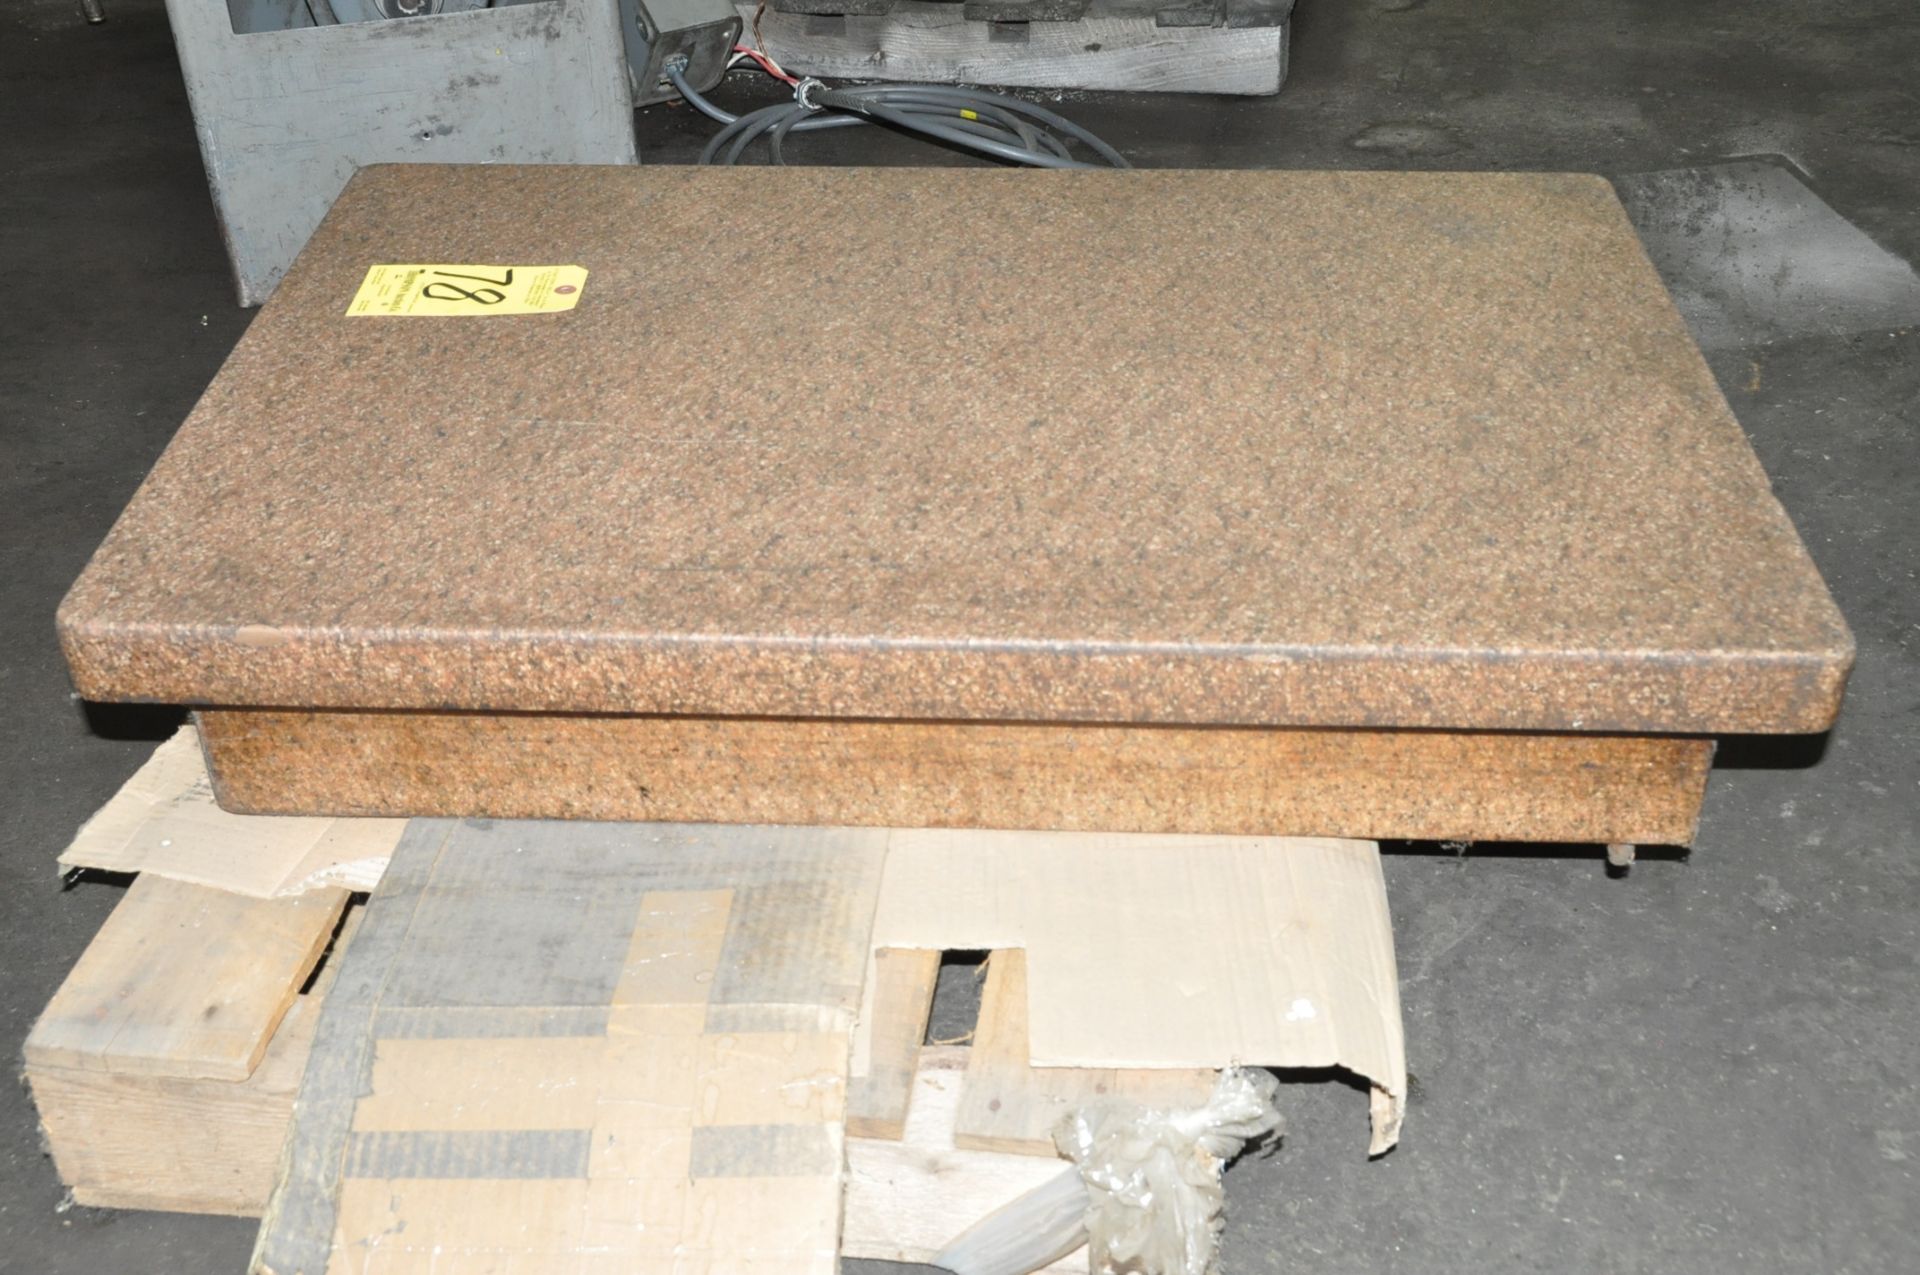 24" x 36" x 6" 4-Ledge Pink Granite Surface Plate on Pallet